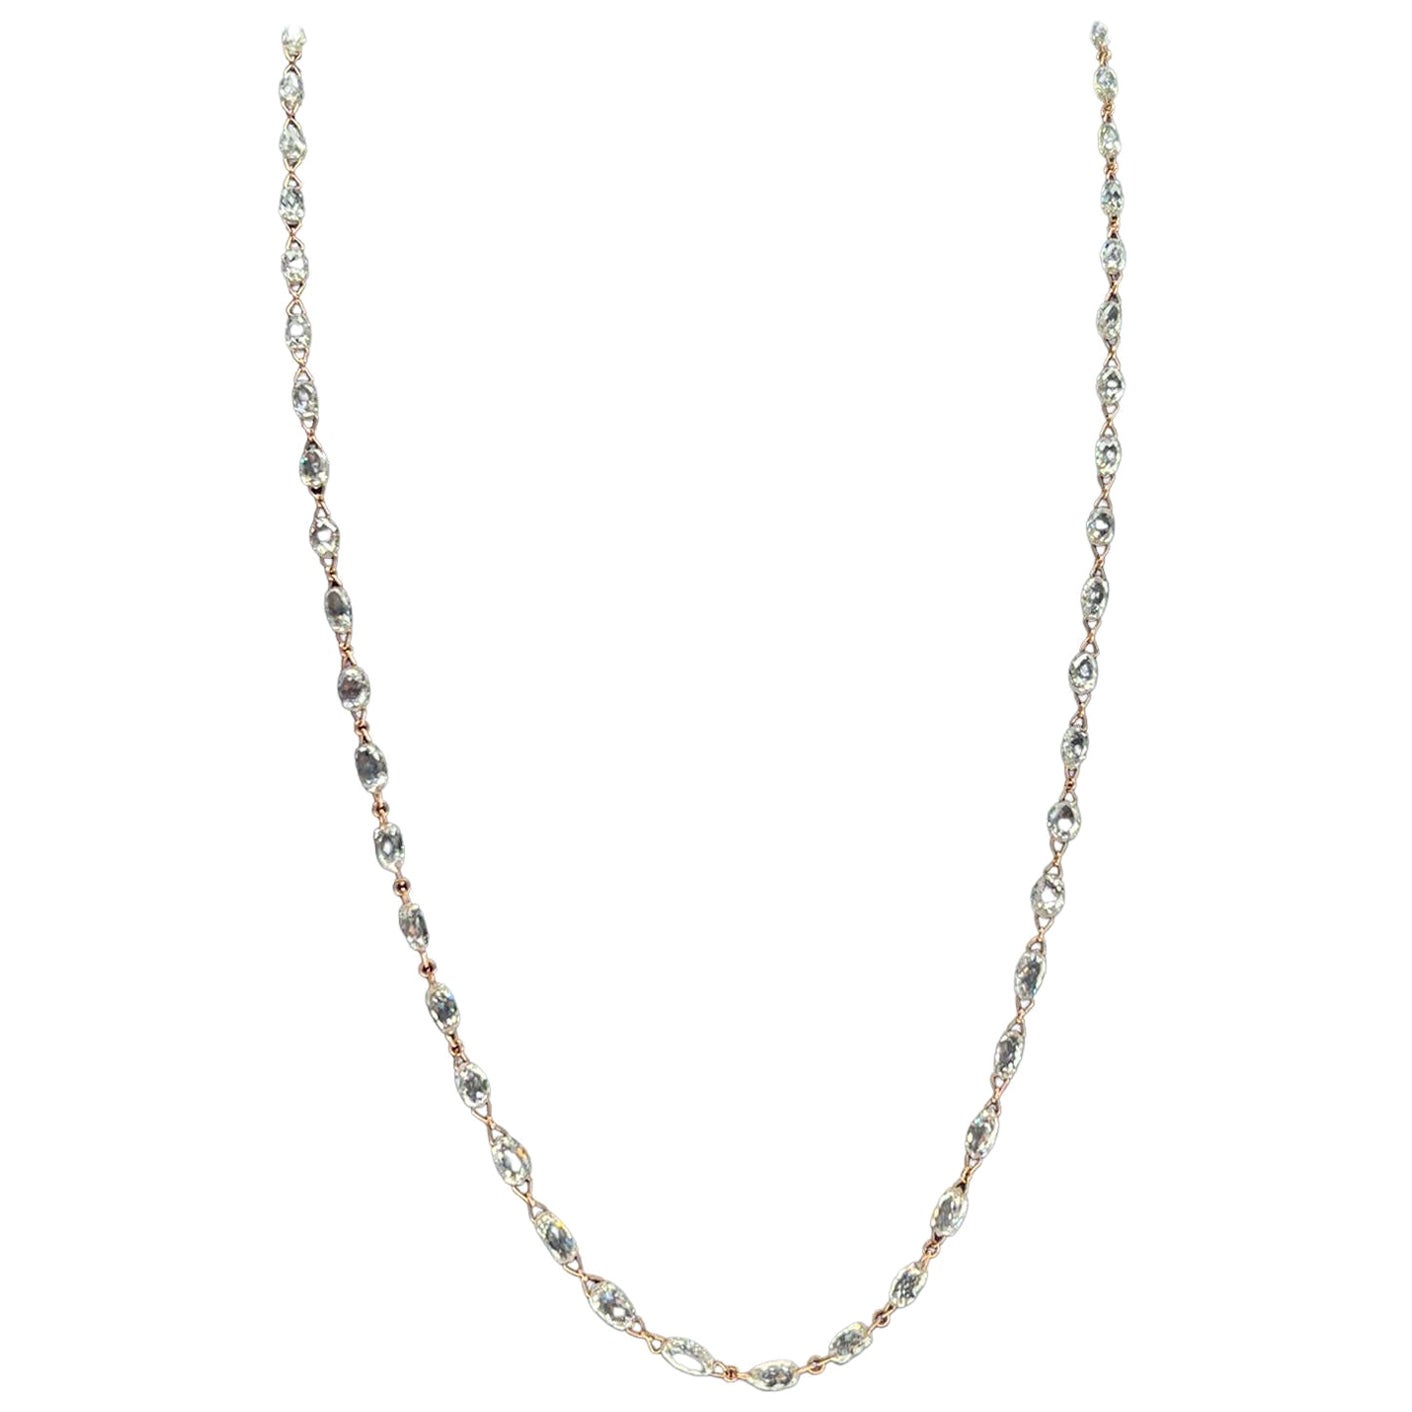 Panim 19.87 Carats Diamond Briolette Chain Necklace in 18k Yellow Gold For Sale